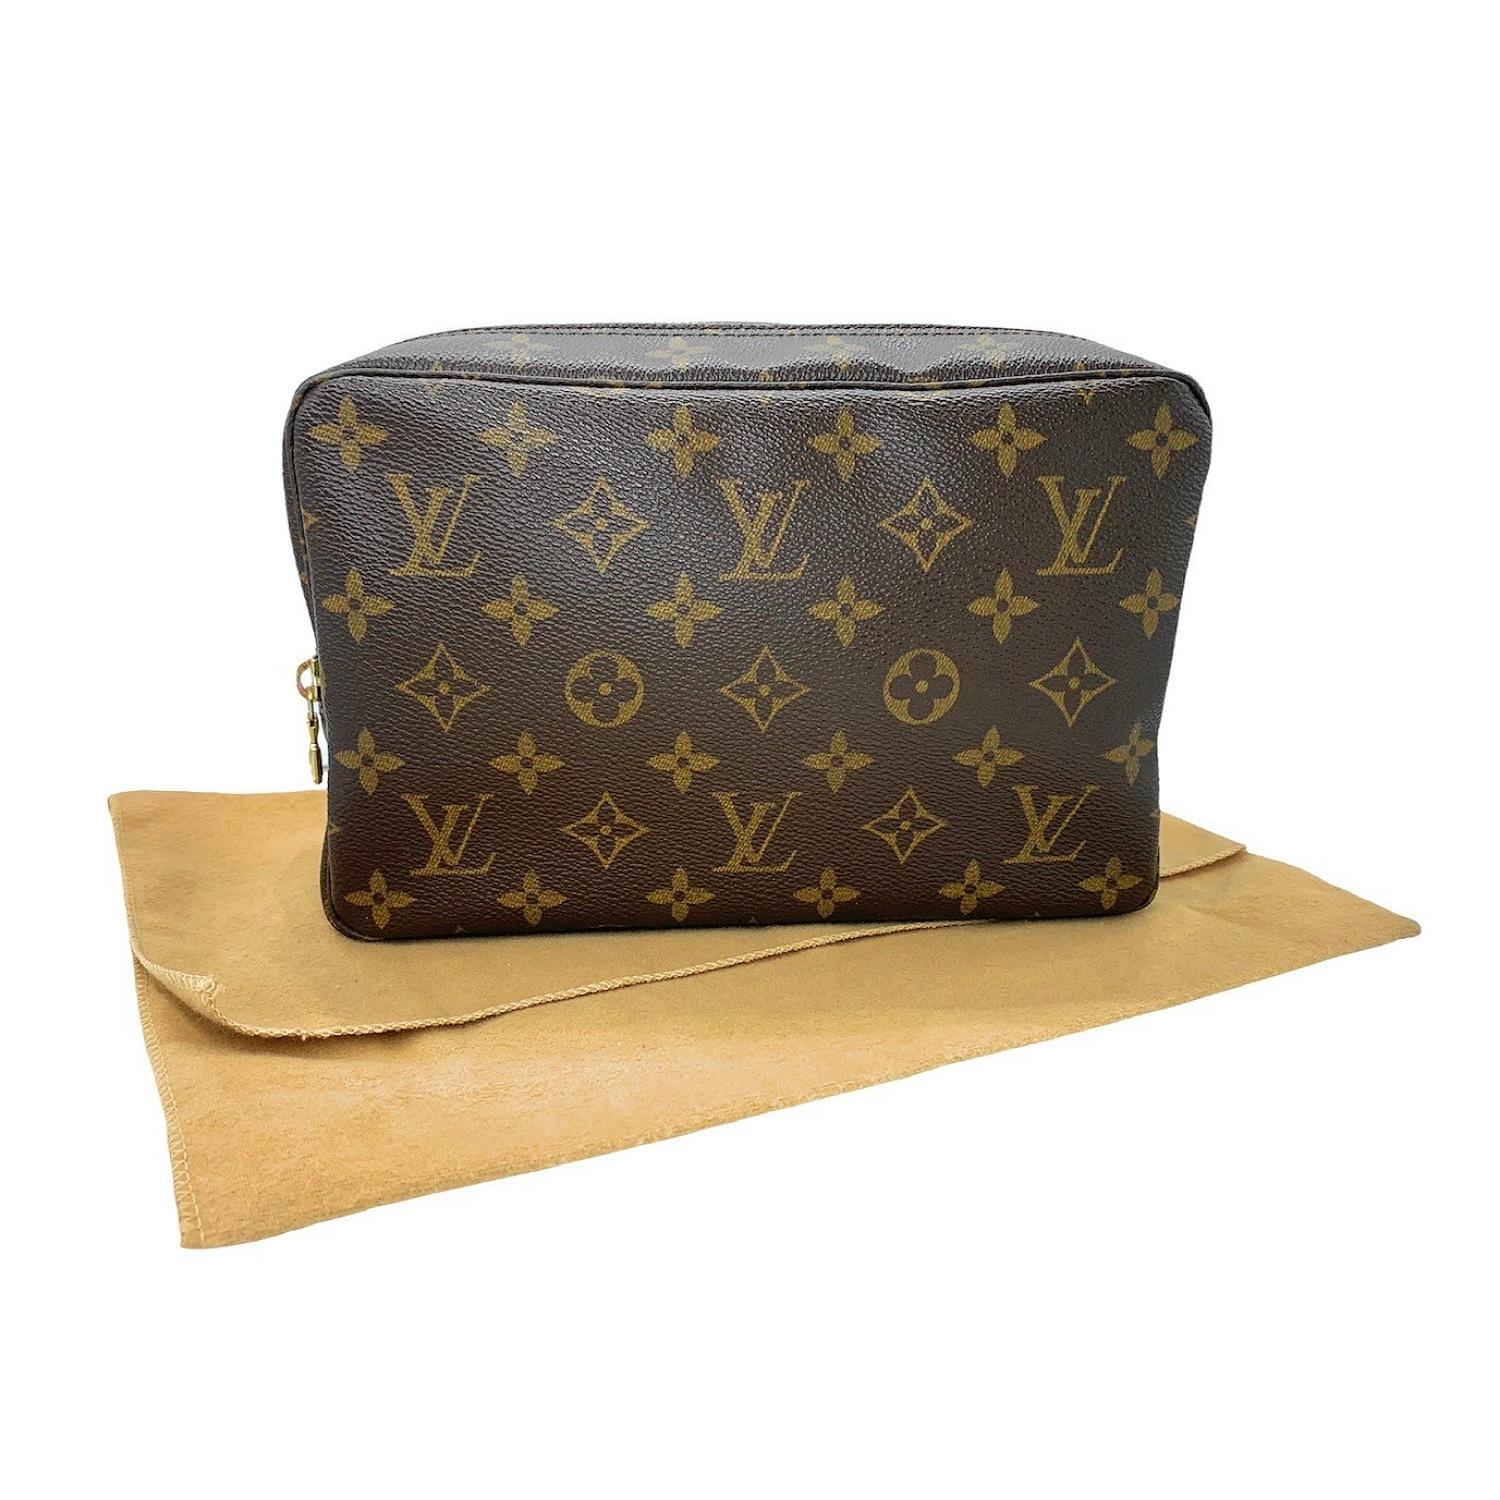 LV Louis Vuitton Toilette vintage pouch. Monogram canvas. Vachetta leather trims. Gold-tone hardware. Top zip closure. Interior textile lining in a neutral color. One interior flat pocket. Three elastic brush holders at the interior wall.